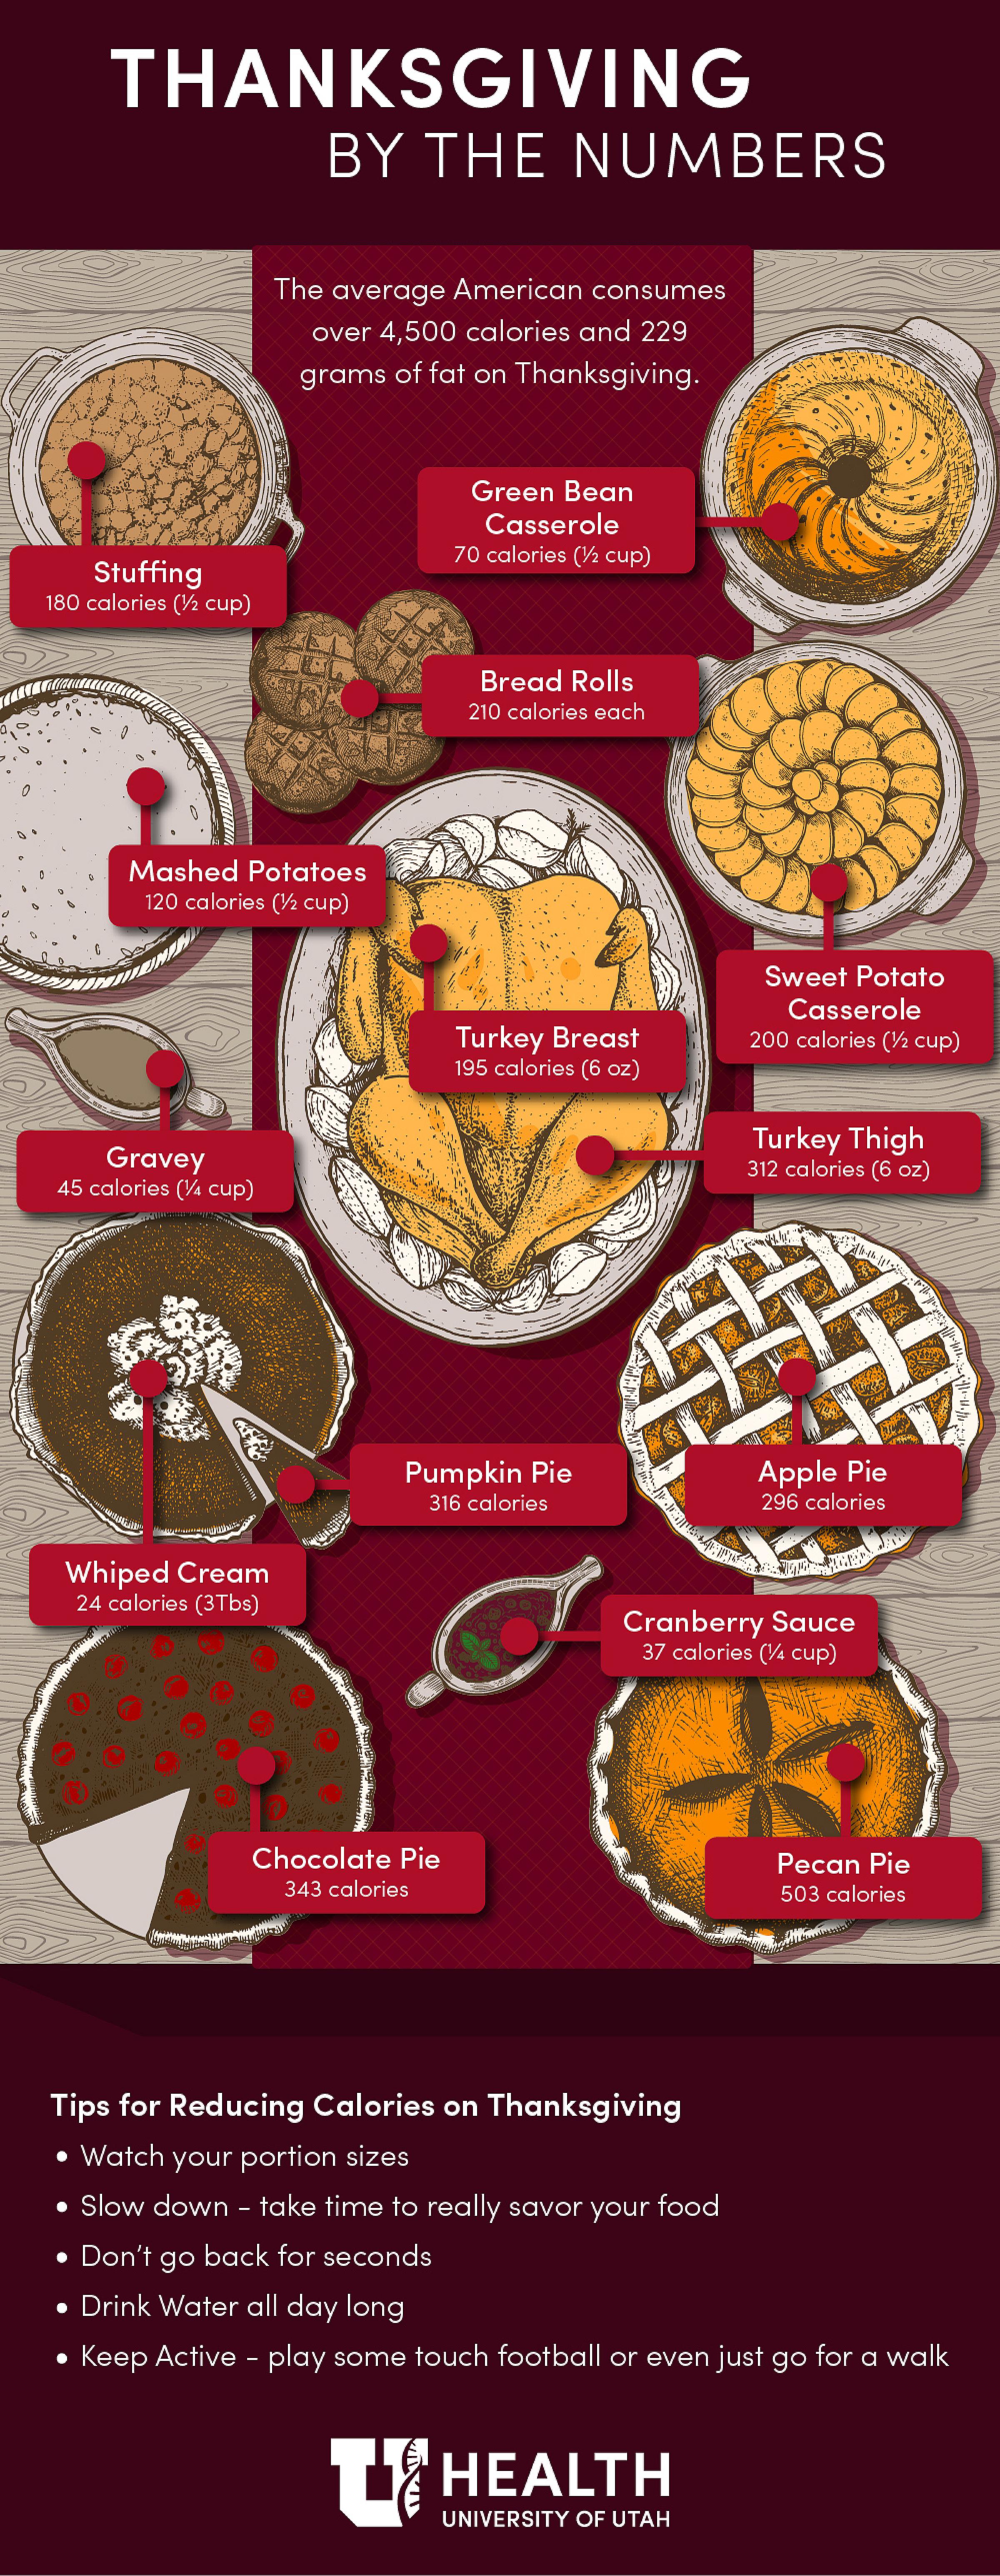 Infographic on Thanksgiving